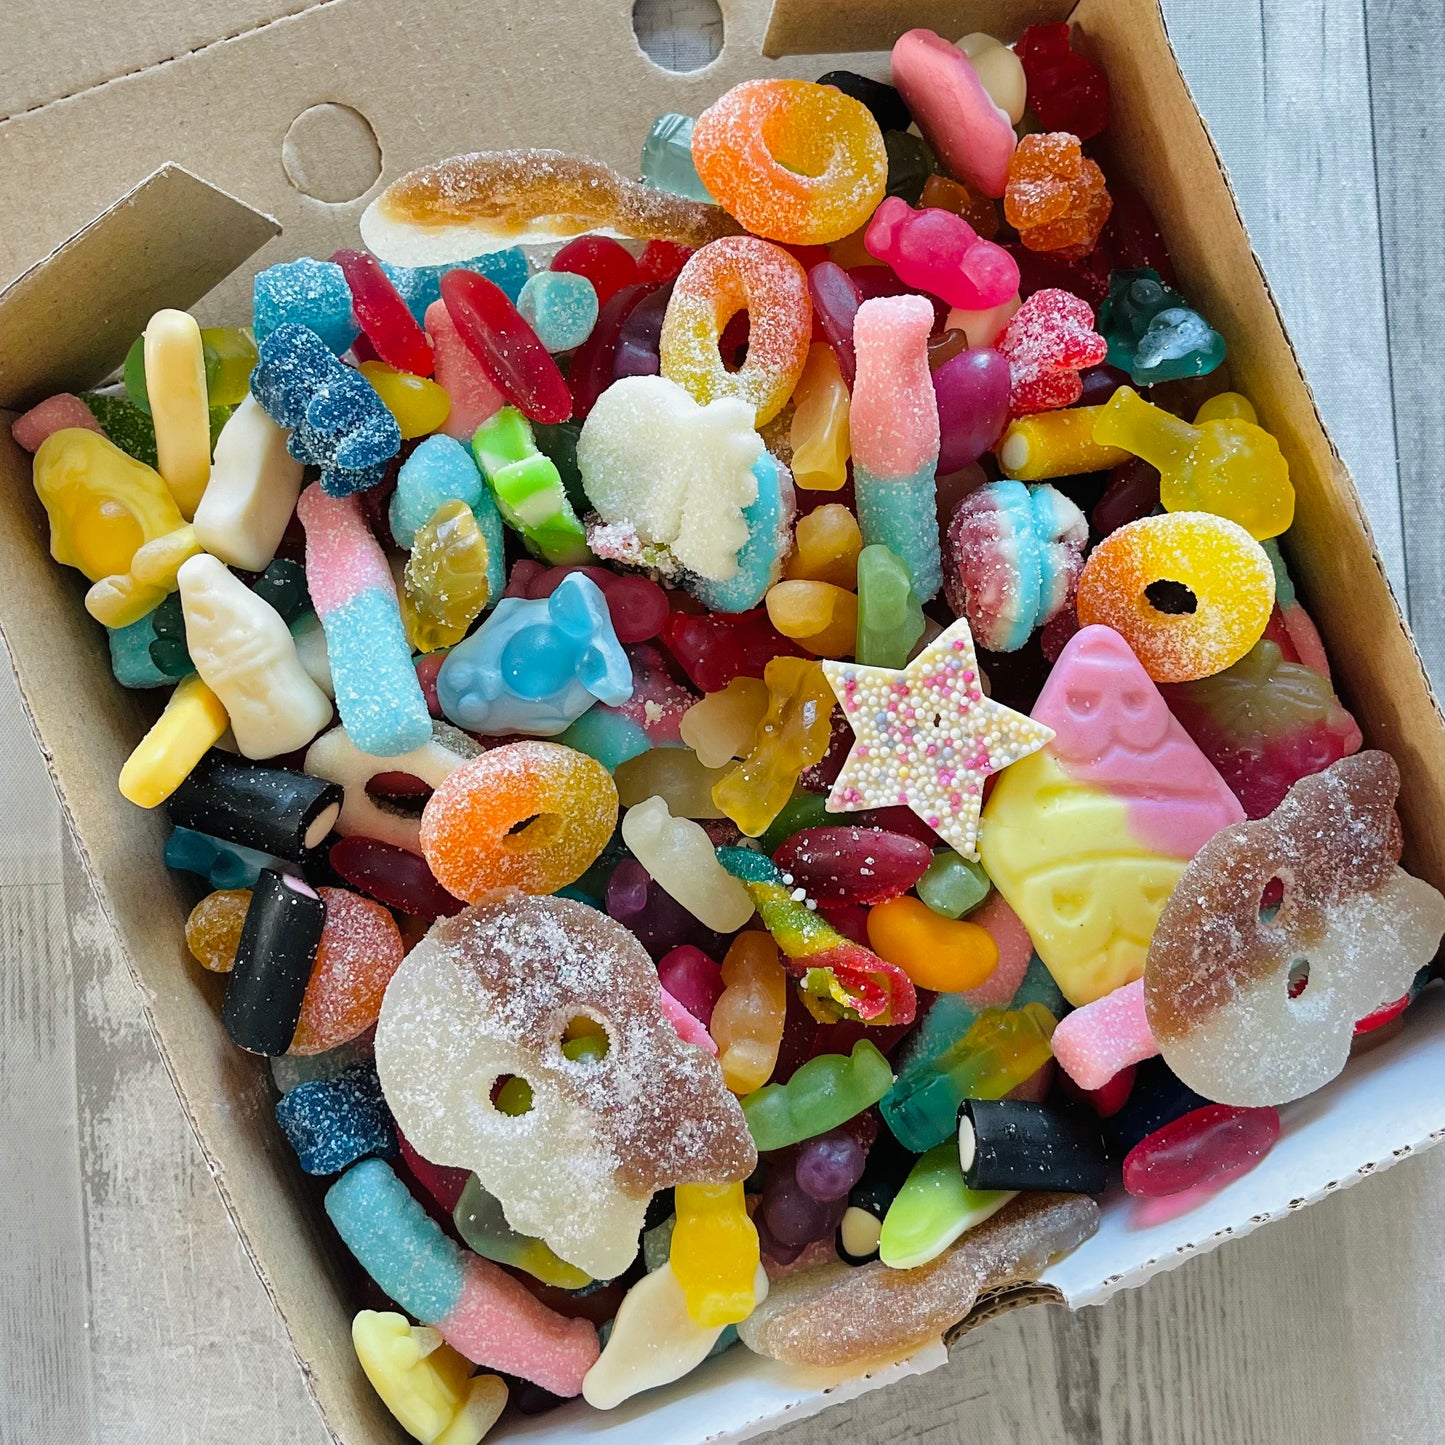 Standard Sweet Boxes - Treats & Sweets